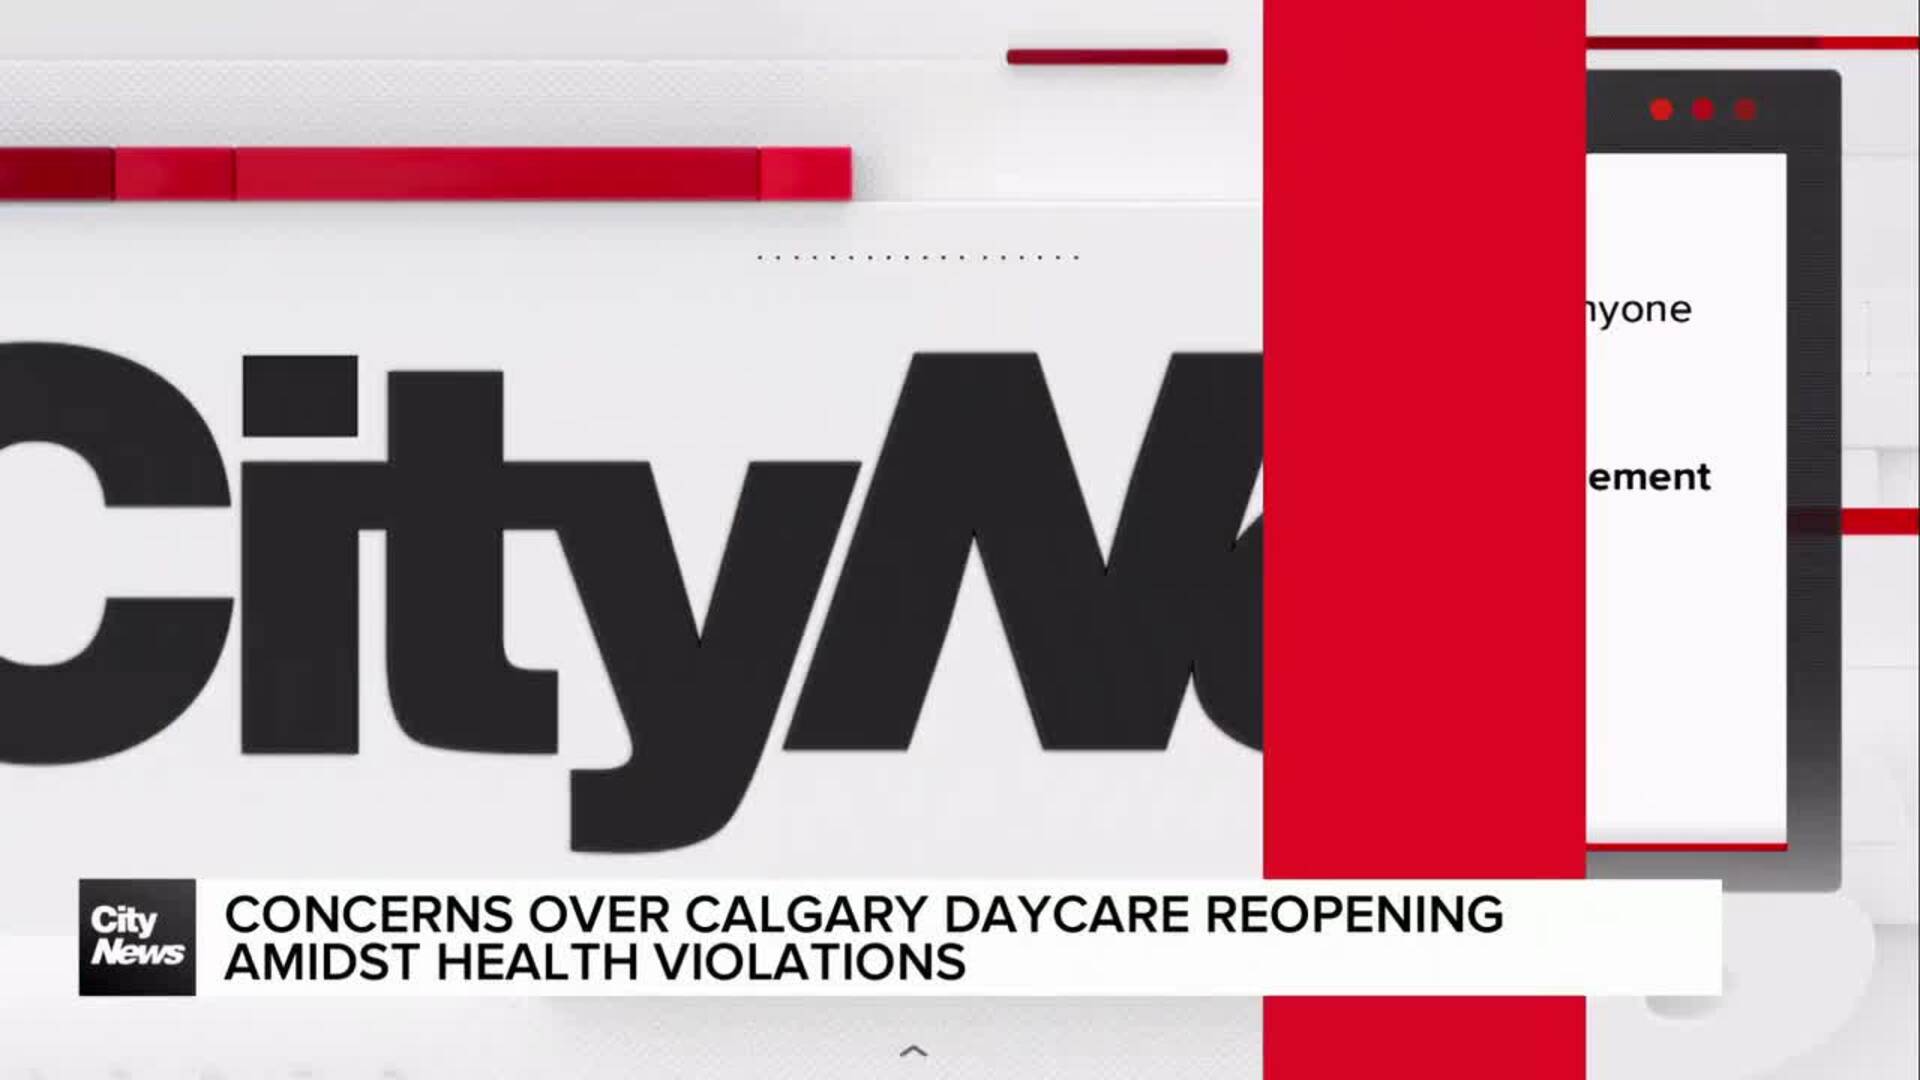 Concerns over Calgary daycare reopening amidst health violations